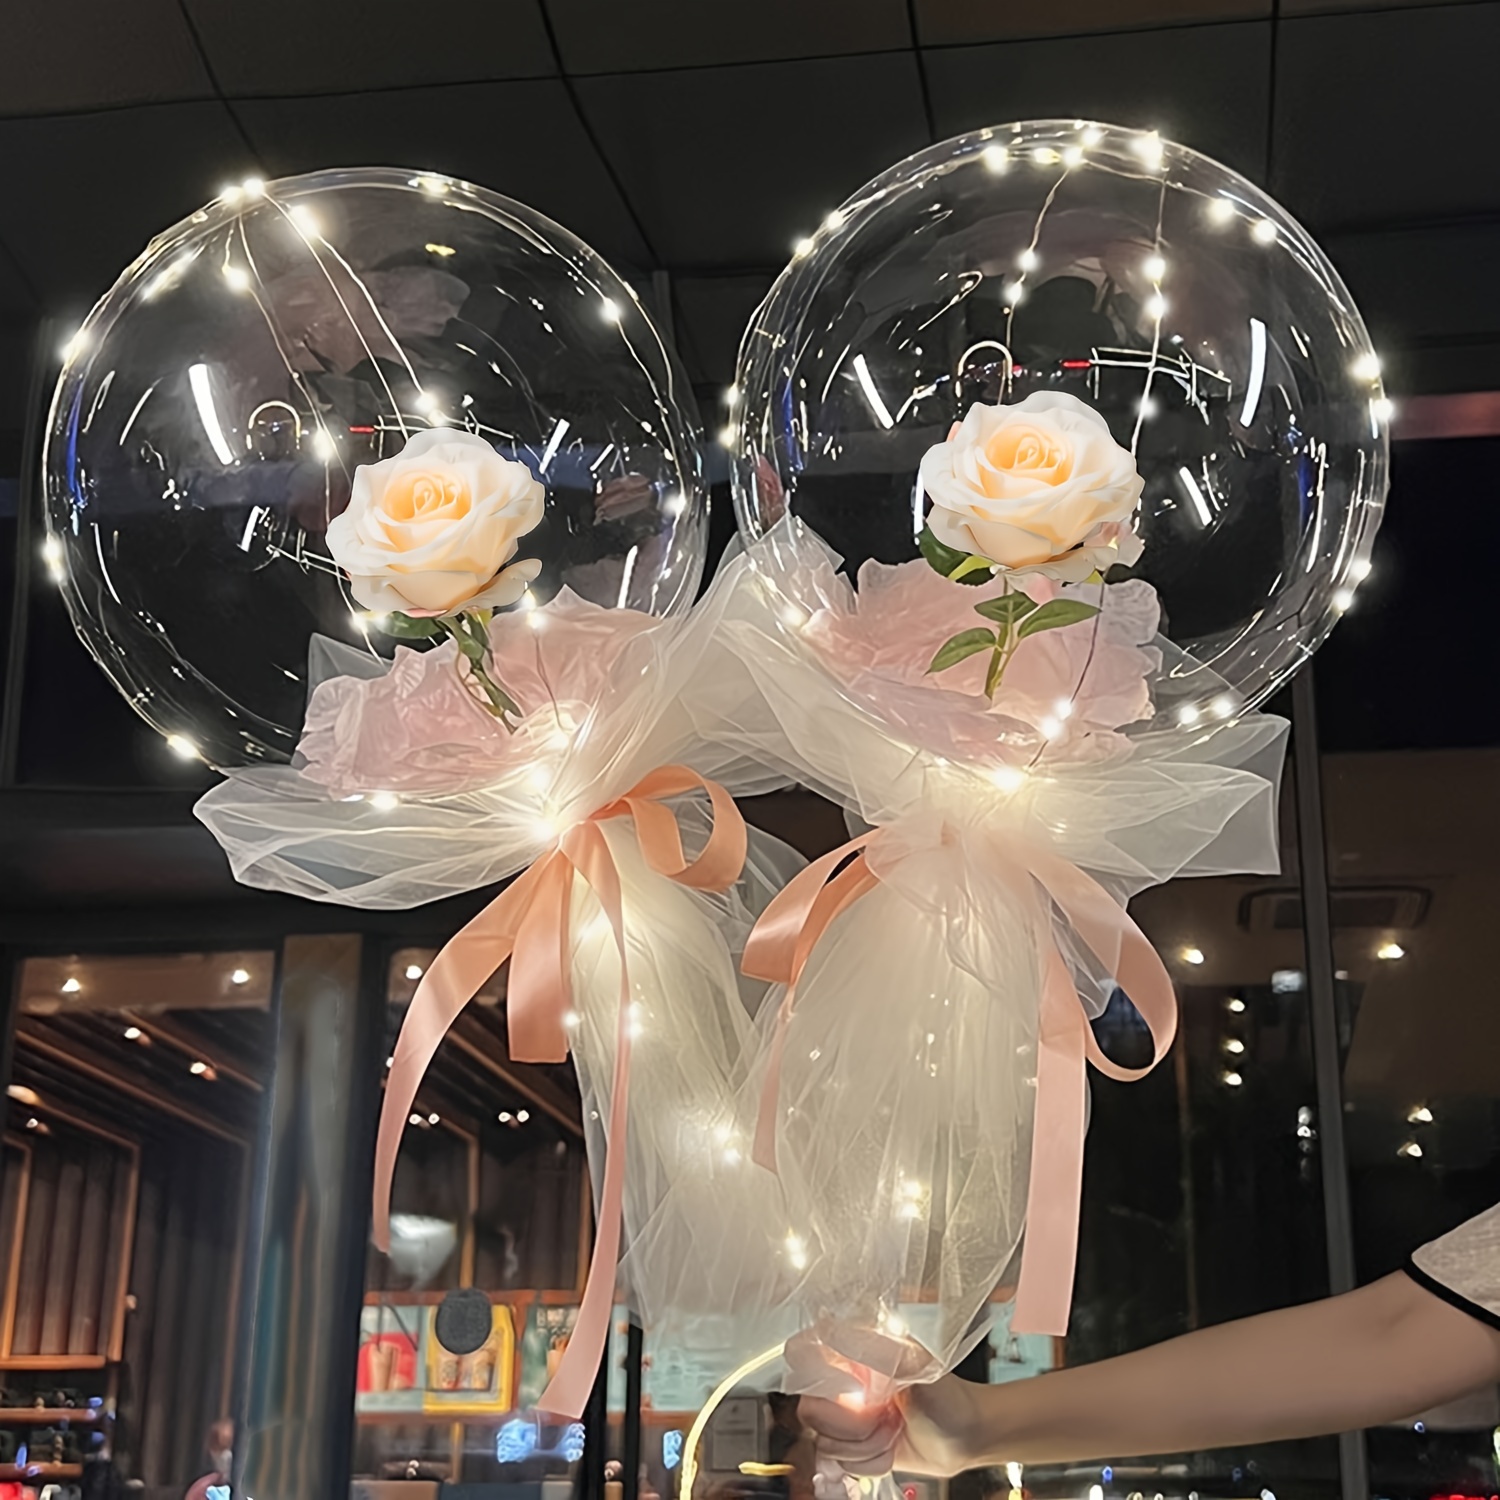 

2pcs Balloons With Led String Lights (without Battery), Champagne Rose Balloons With Trolley, For Wedding, Valentine's Day, Mother's Day, Birthday, Party Decoration